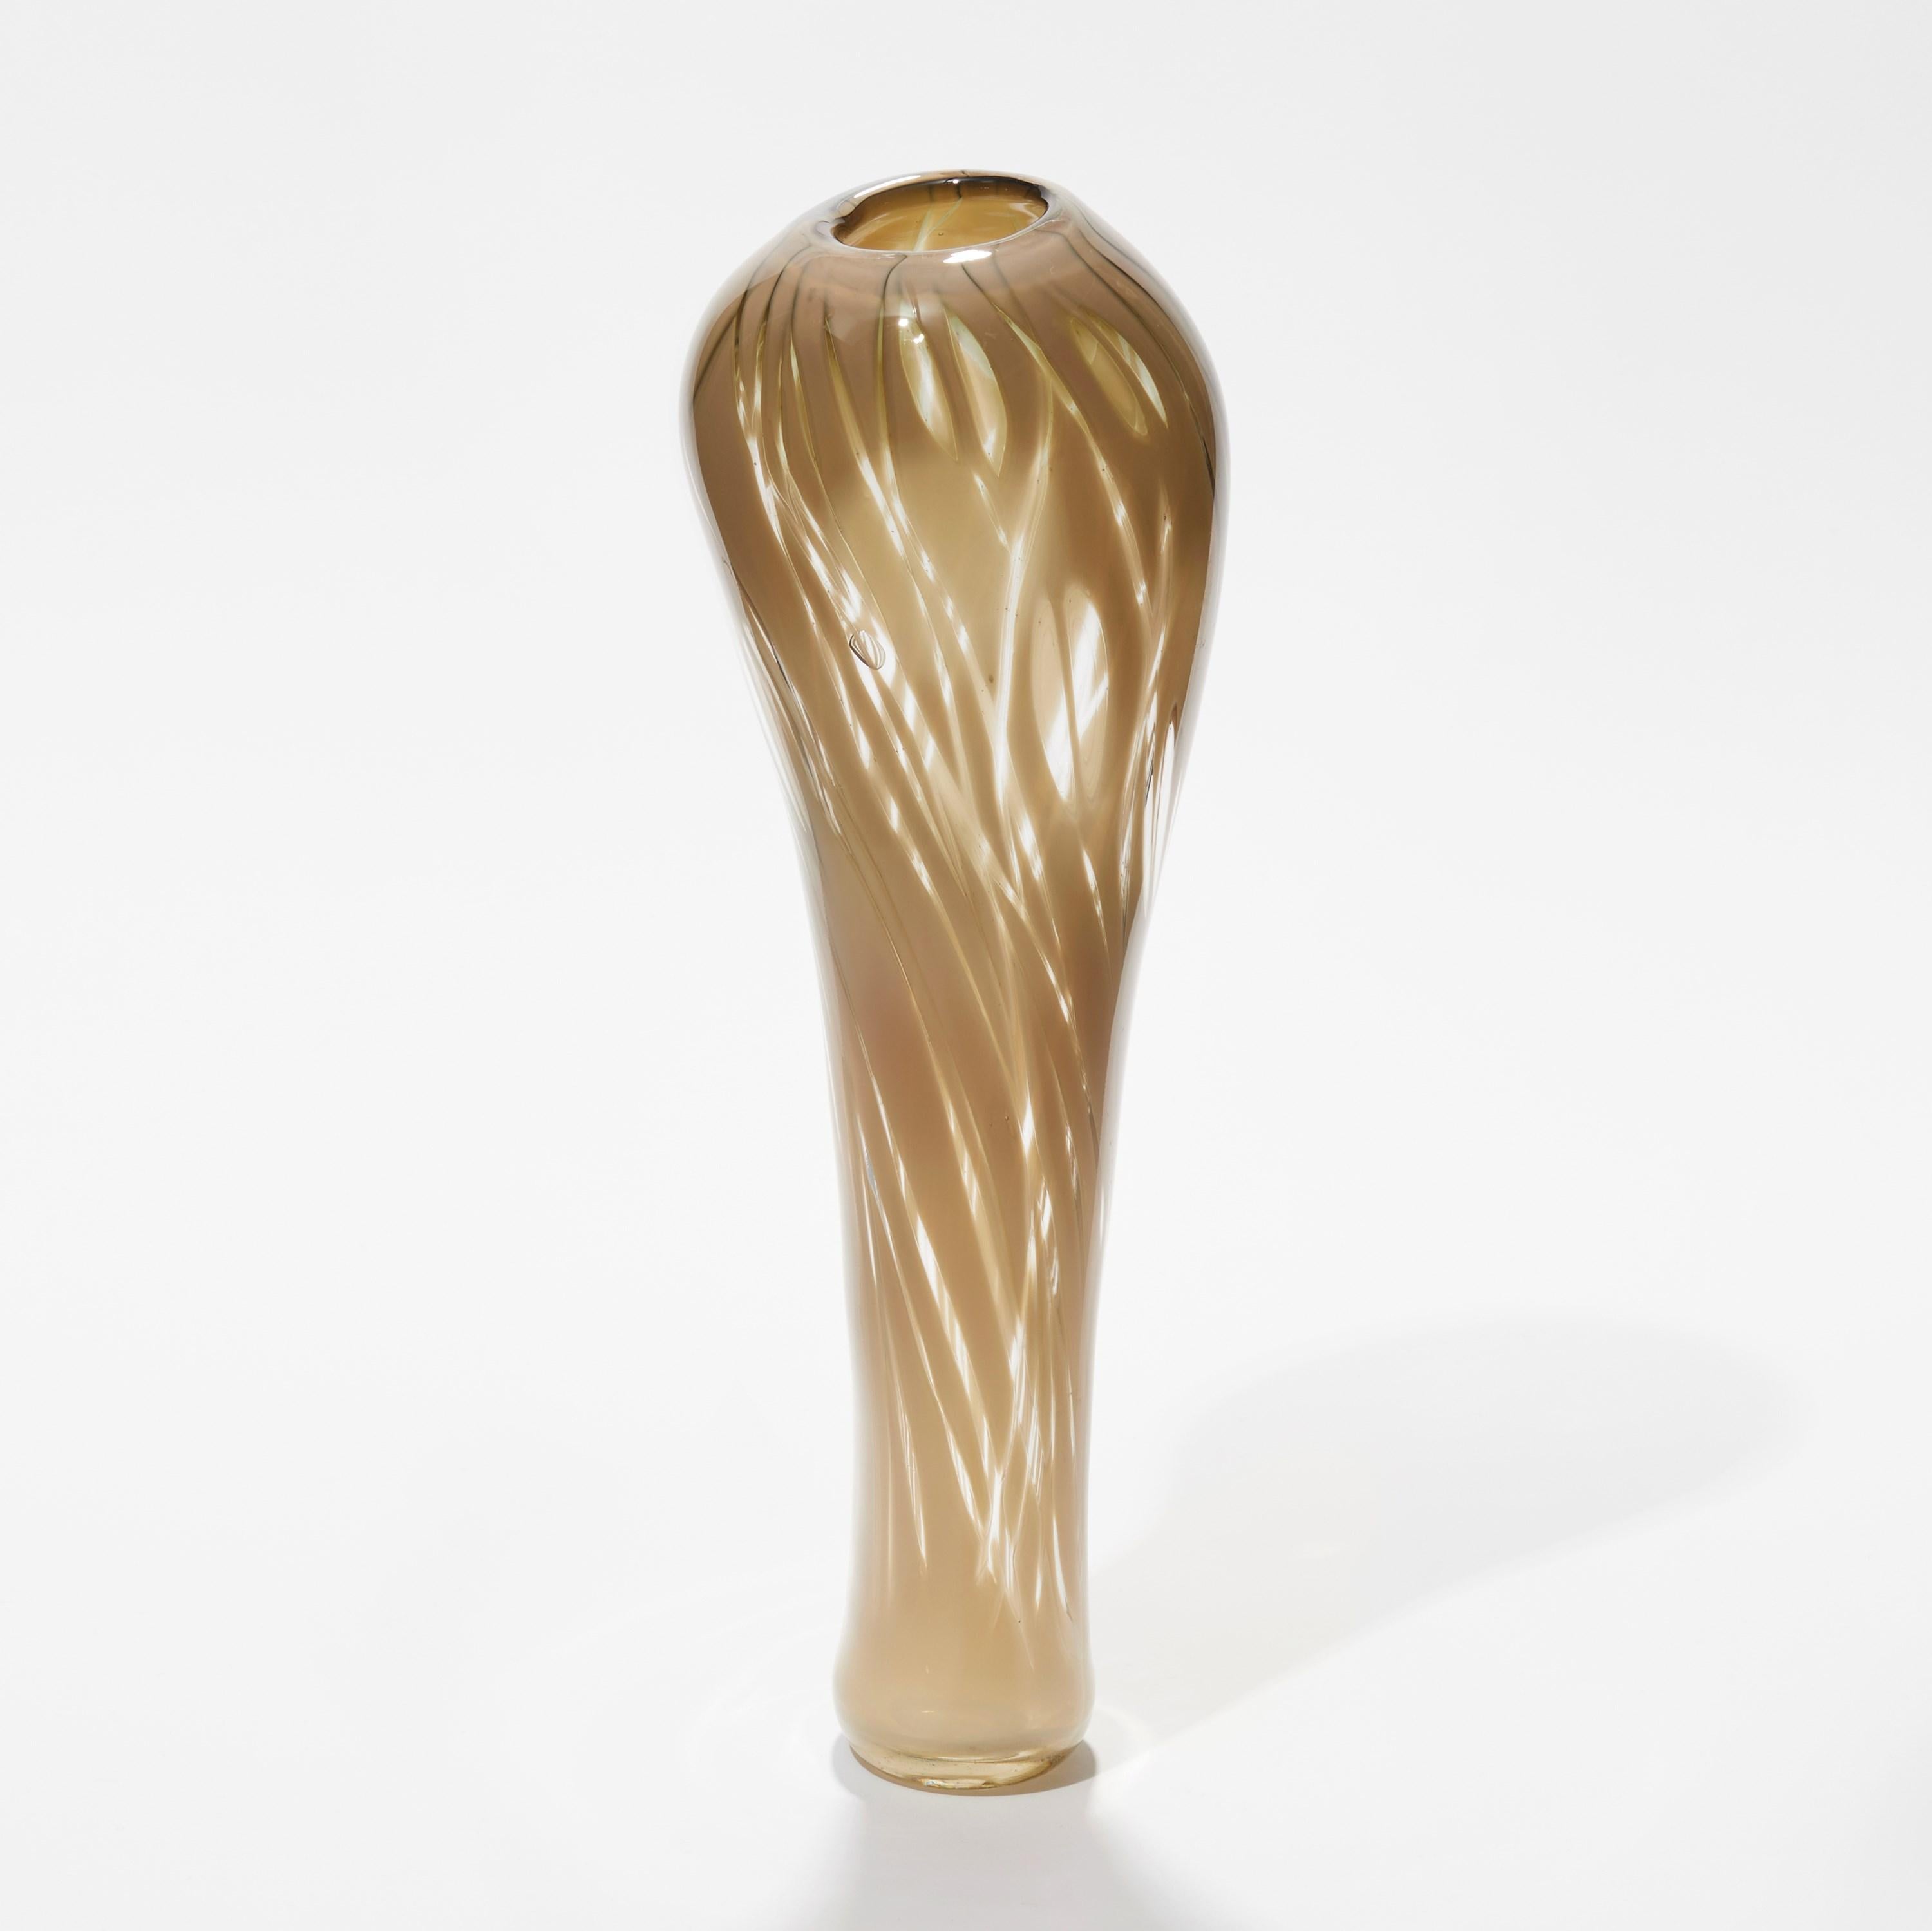 'Cotinus I' is a unique glass artwork by the Canadian artist, Michèle Oberdieck.

Michèle Oberdieck explores balance and asymmetry through colour, form and surface decoration. Presenting her sculptural works as a gesture, an expressive mark, often